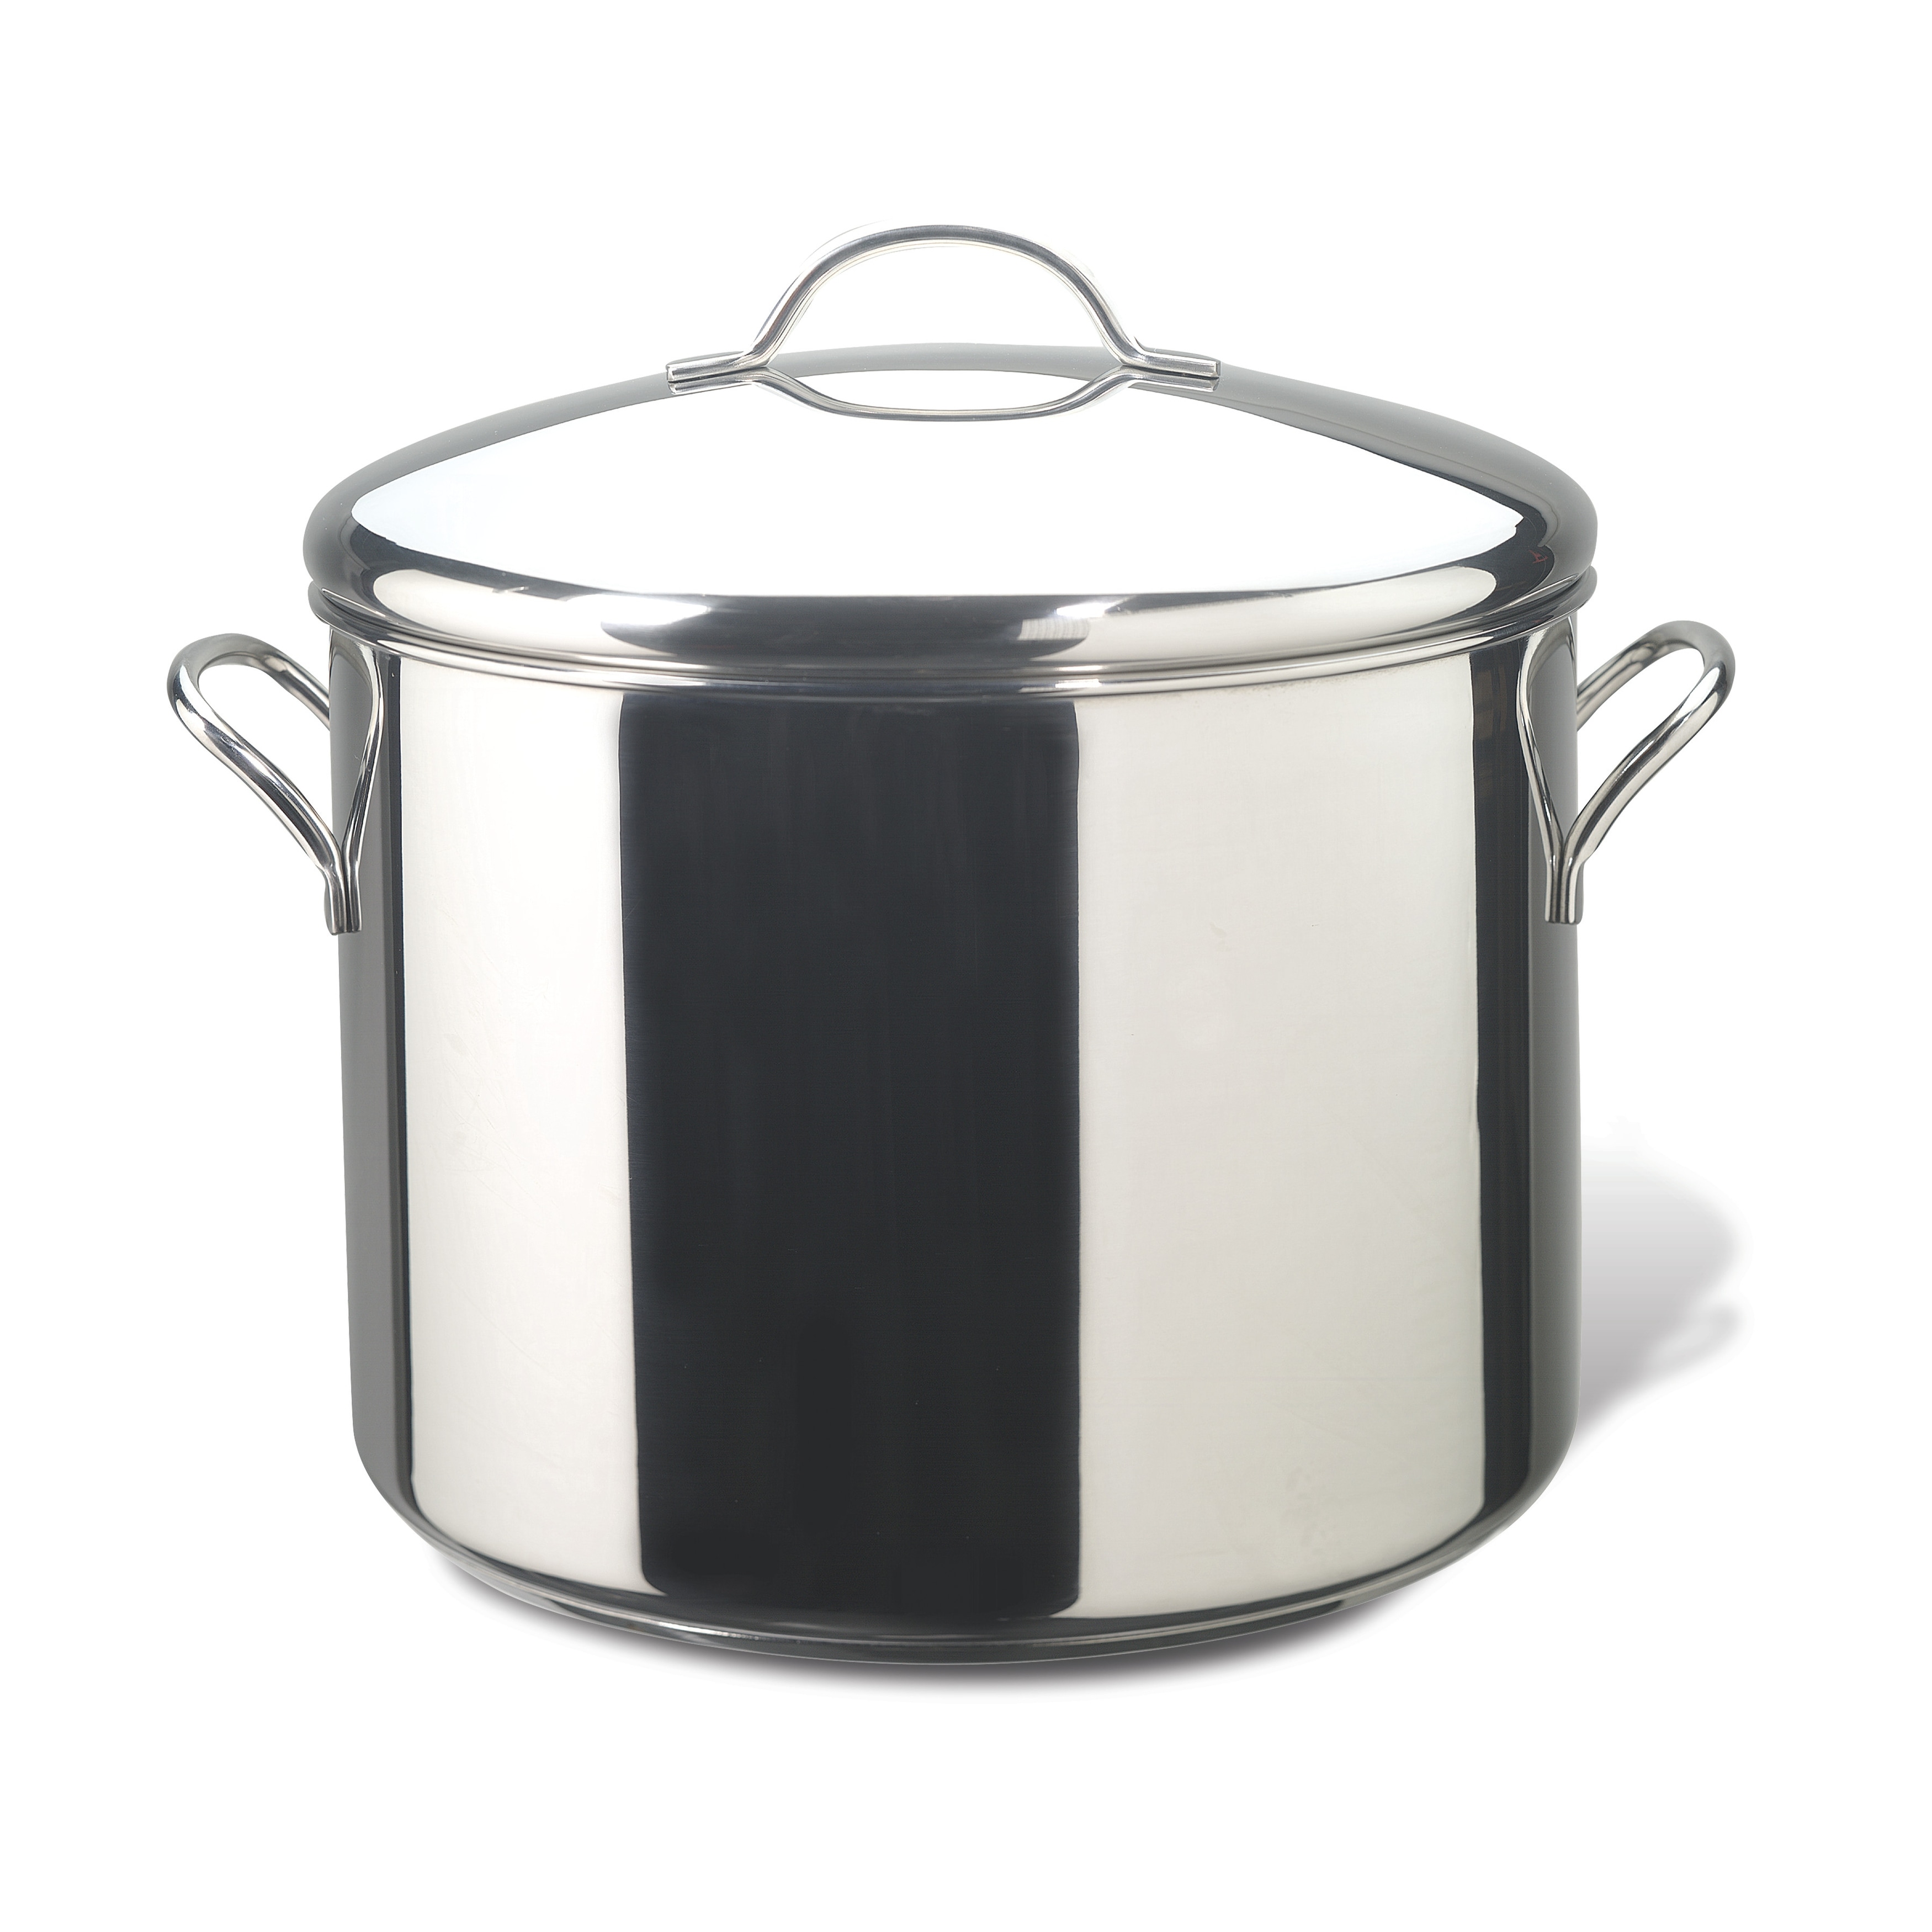 https://ak1.ostkcdn.com/images/products/is/images/direct/c9f537a86d5656eedbb4a3d5a4b87e6b65291001/Farberware-Classic-Stainless-Steel-16-quart-Covered-Stockpot.jpg